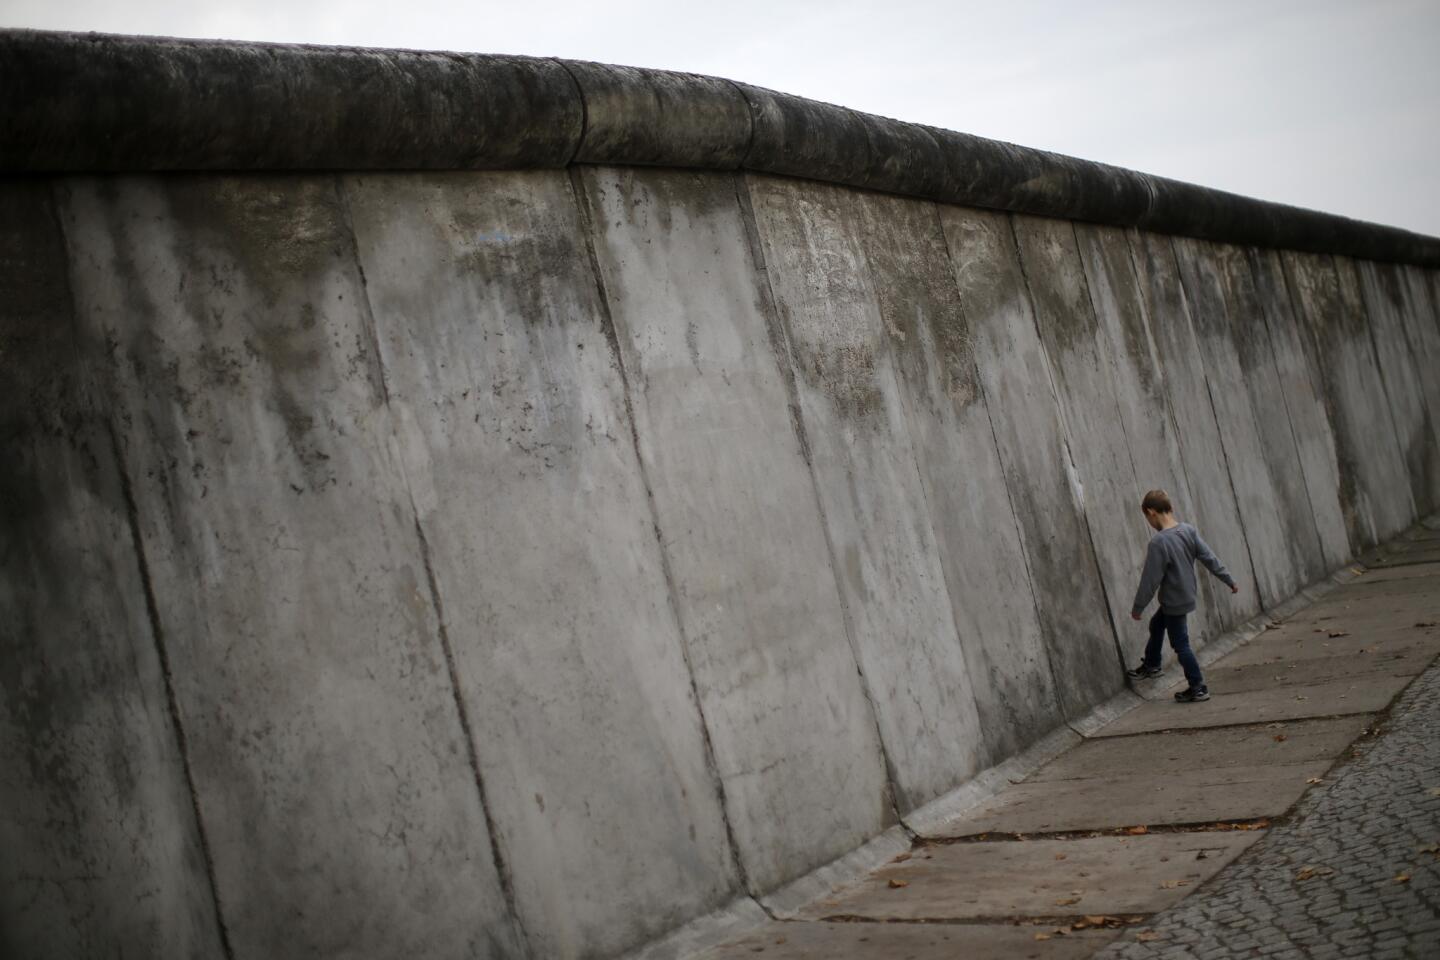 A boy kicks against a concrete segment of the Berlin Wall at the Bernauer Strasse in 2014.